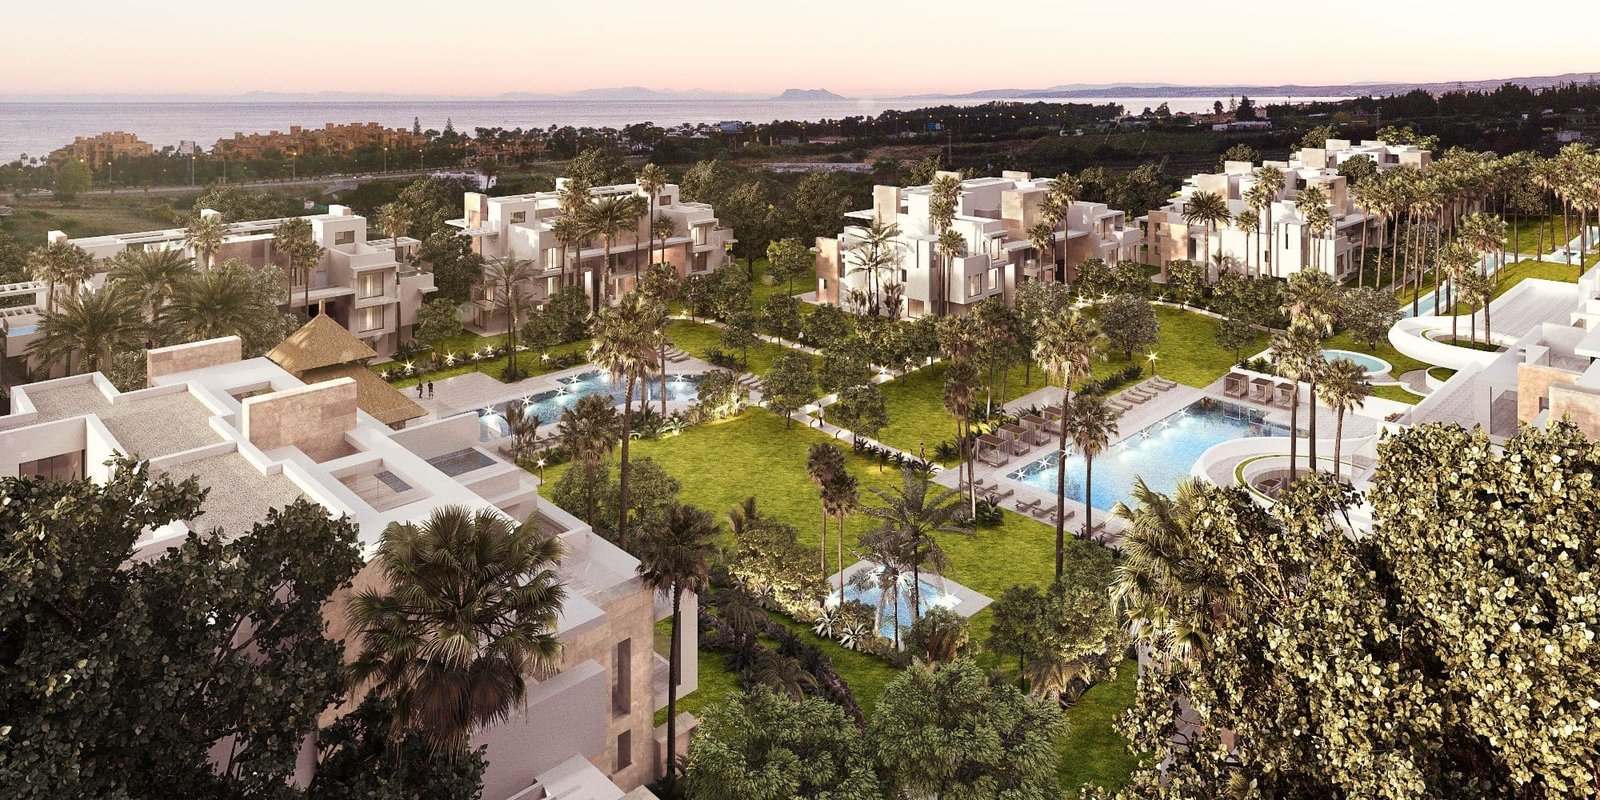 2/3 Bed Residences & 3/4 Bed Penthouses in Estepona new Golden Mile